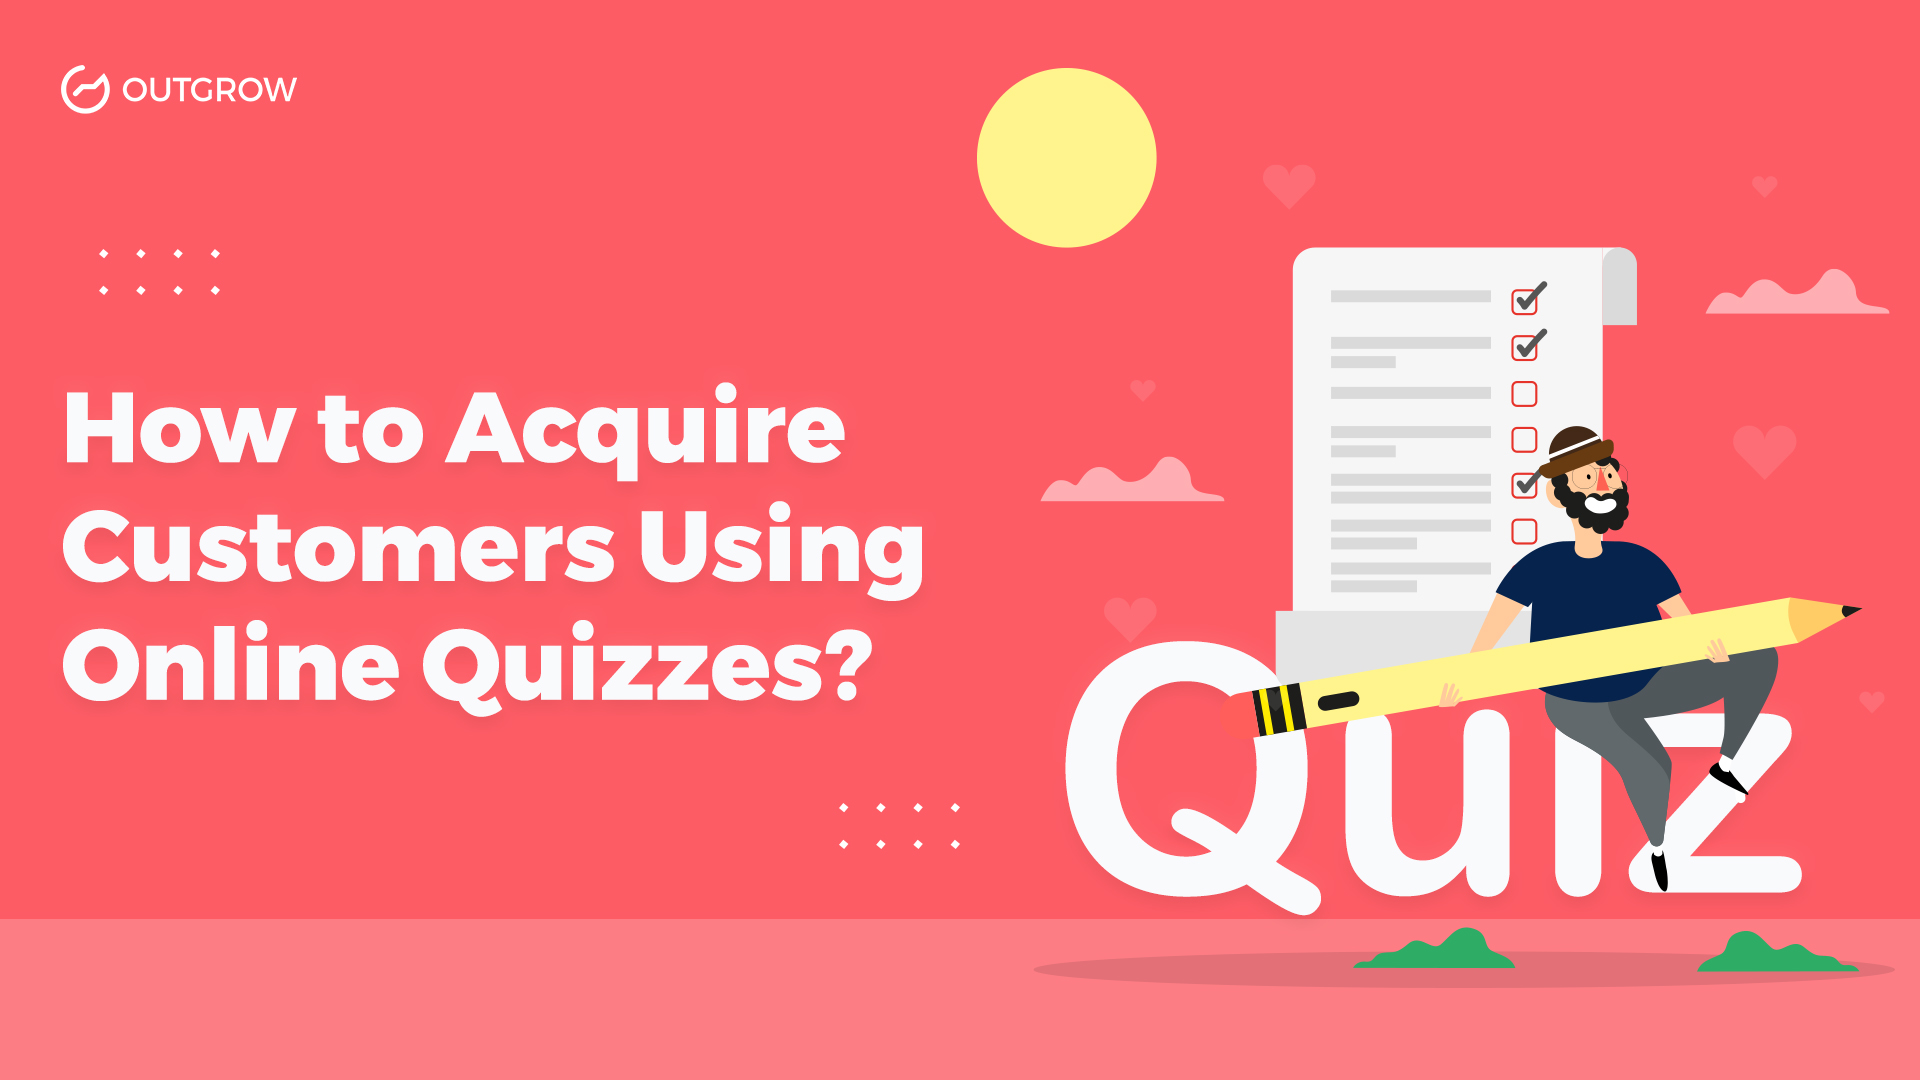 How to acquire customers using online quizzes